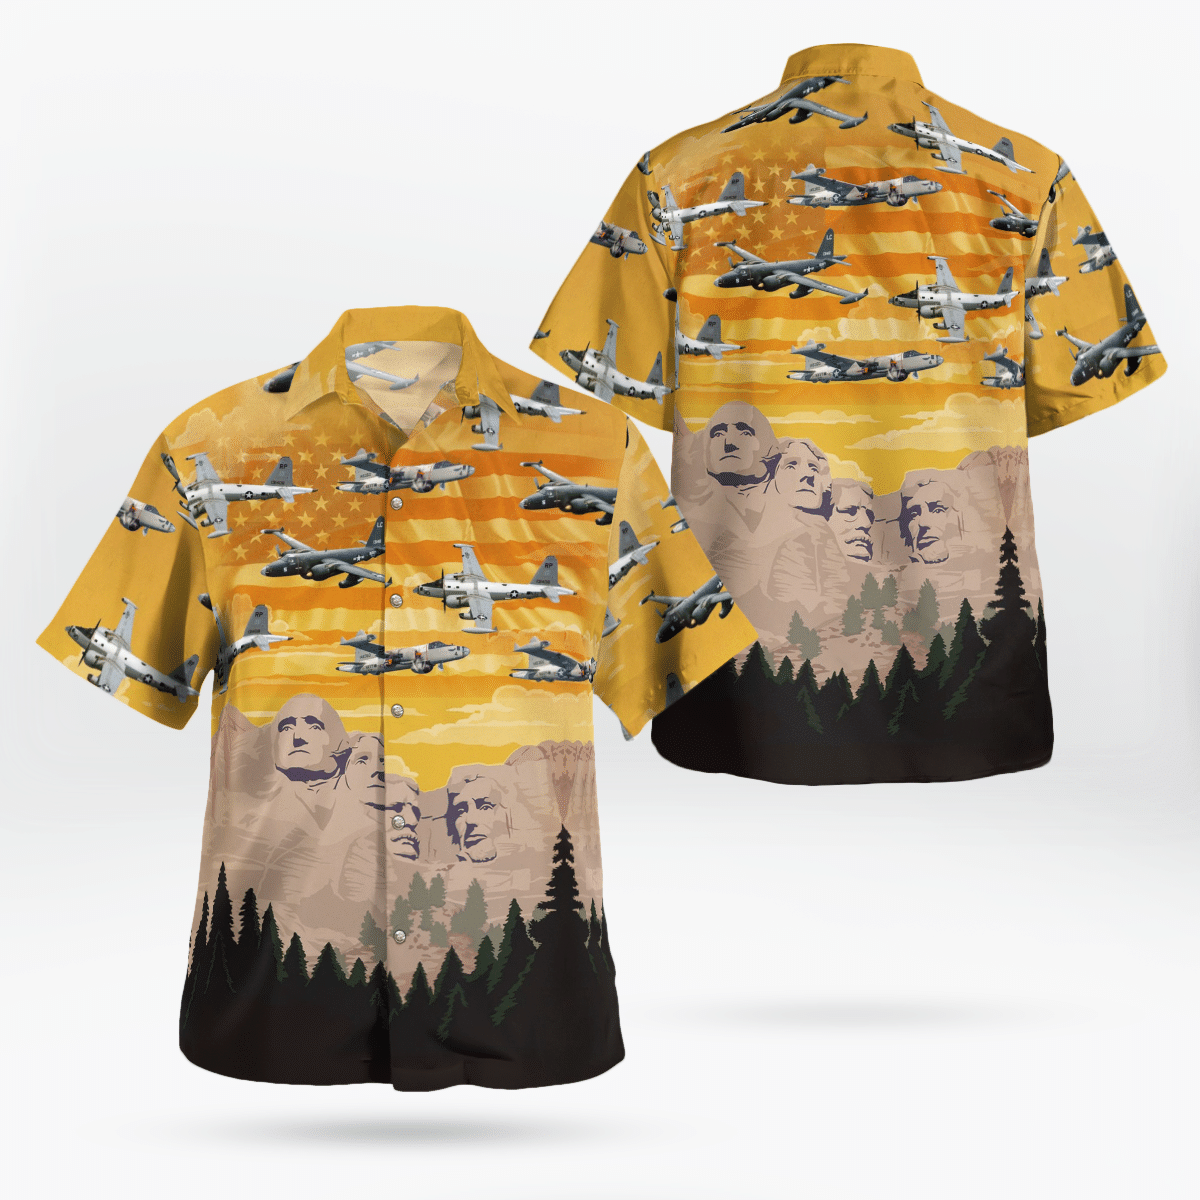 Shop now to find the perfect Hawaii Shirt for your hobby 34